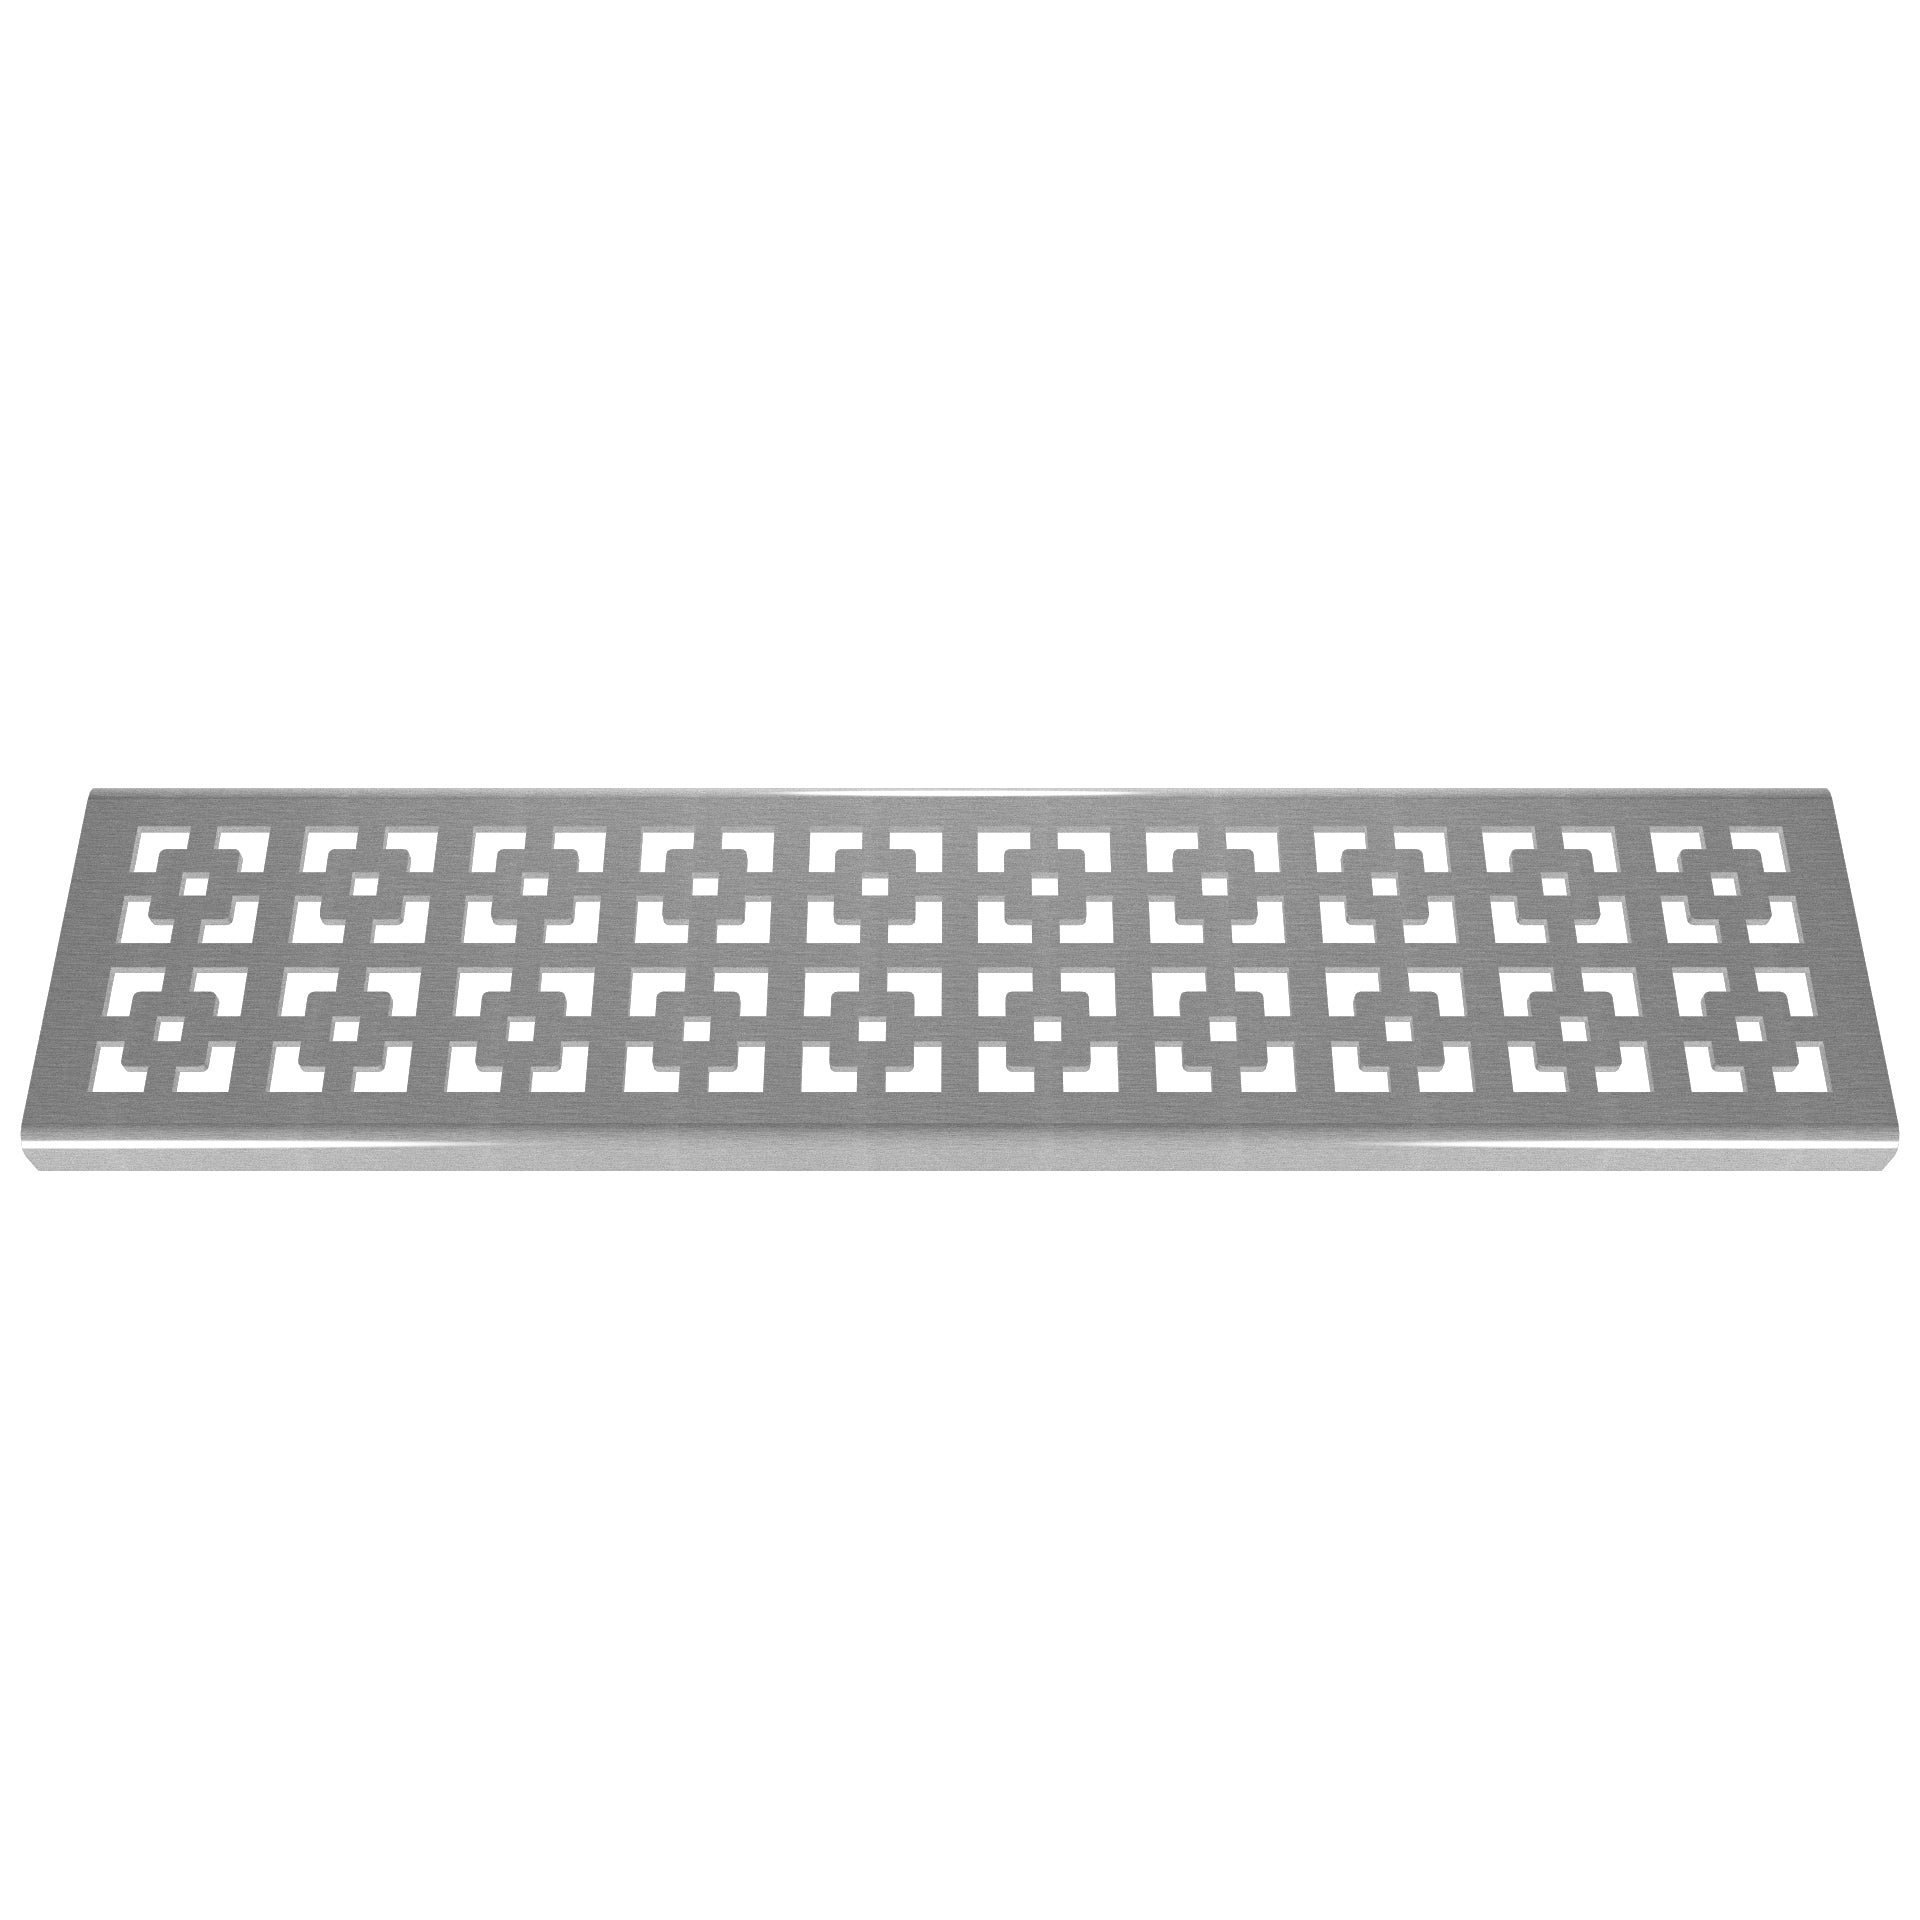 Geo Squares 304 Stainless Steel Channel Drain Grate 75 x 913mm (3 Inch)